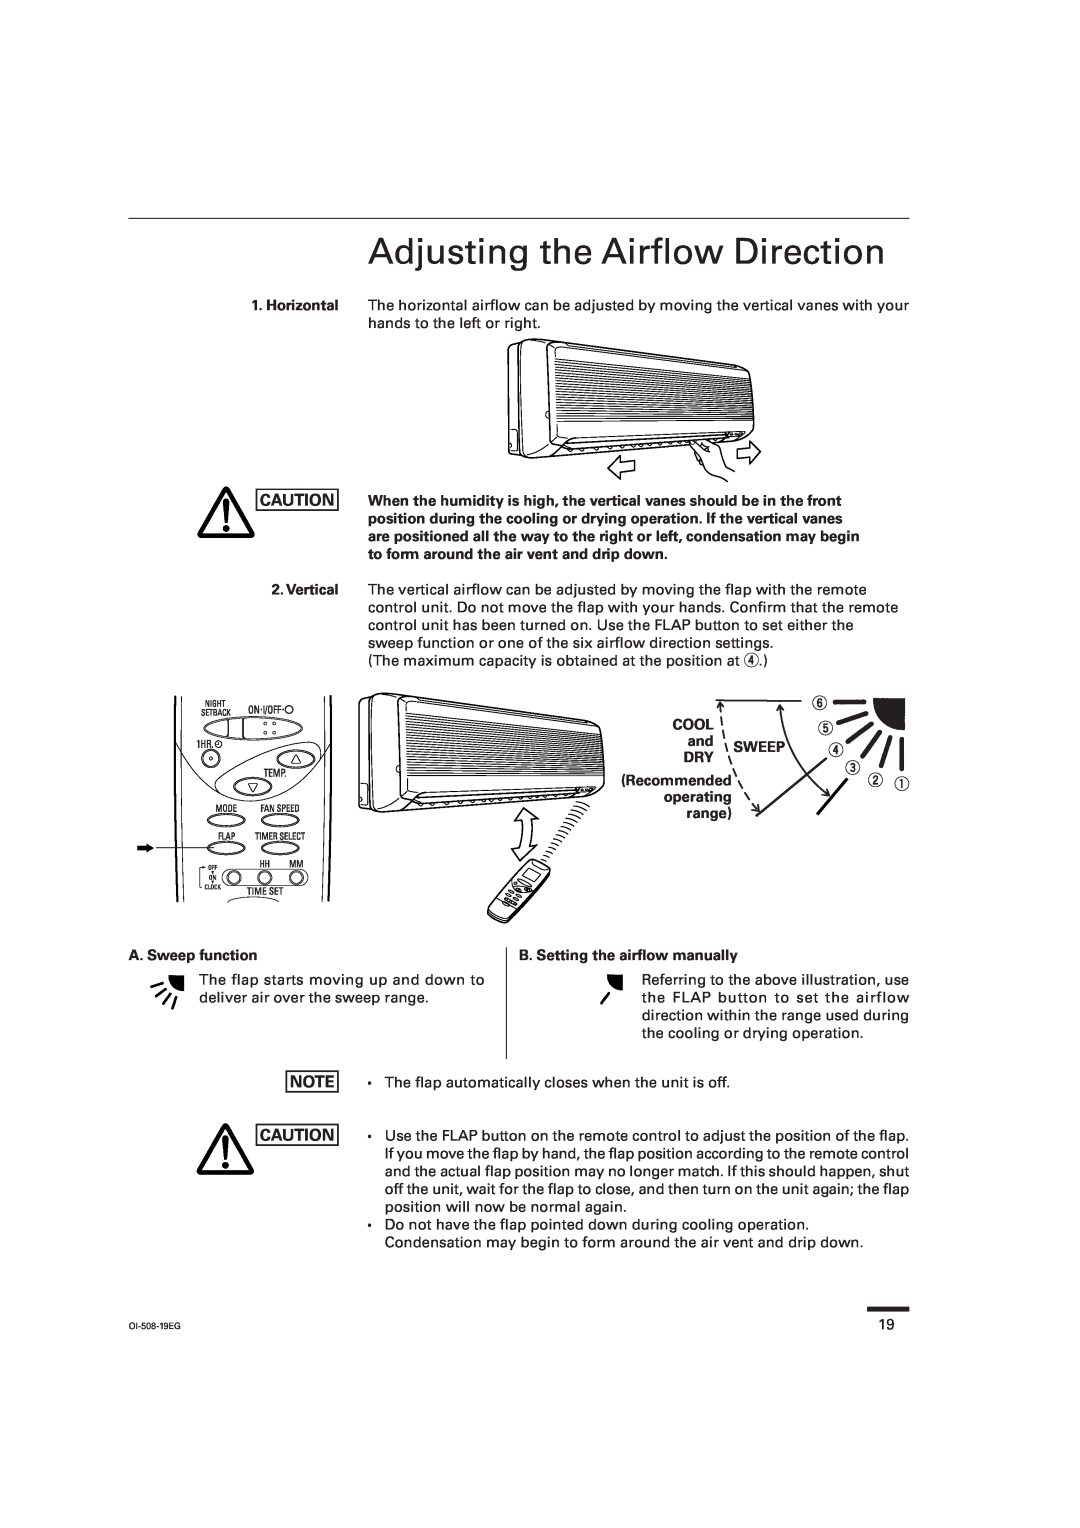 Sanyo KS2462R Adjusting the Airflow Direction, A. Sweep function, COOL and SWEEP DRY Recommended operating range 